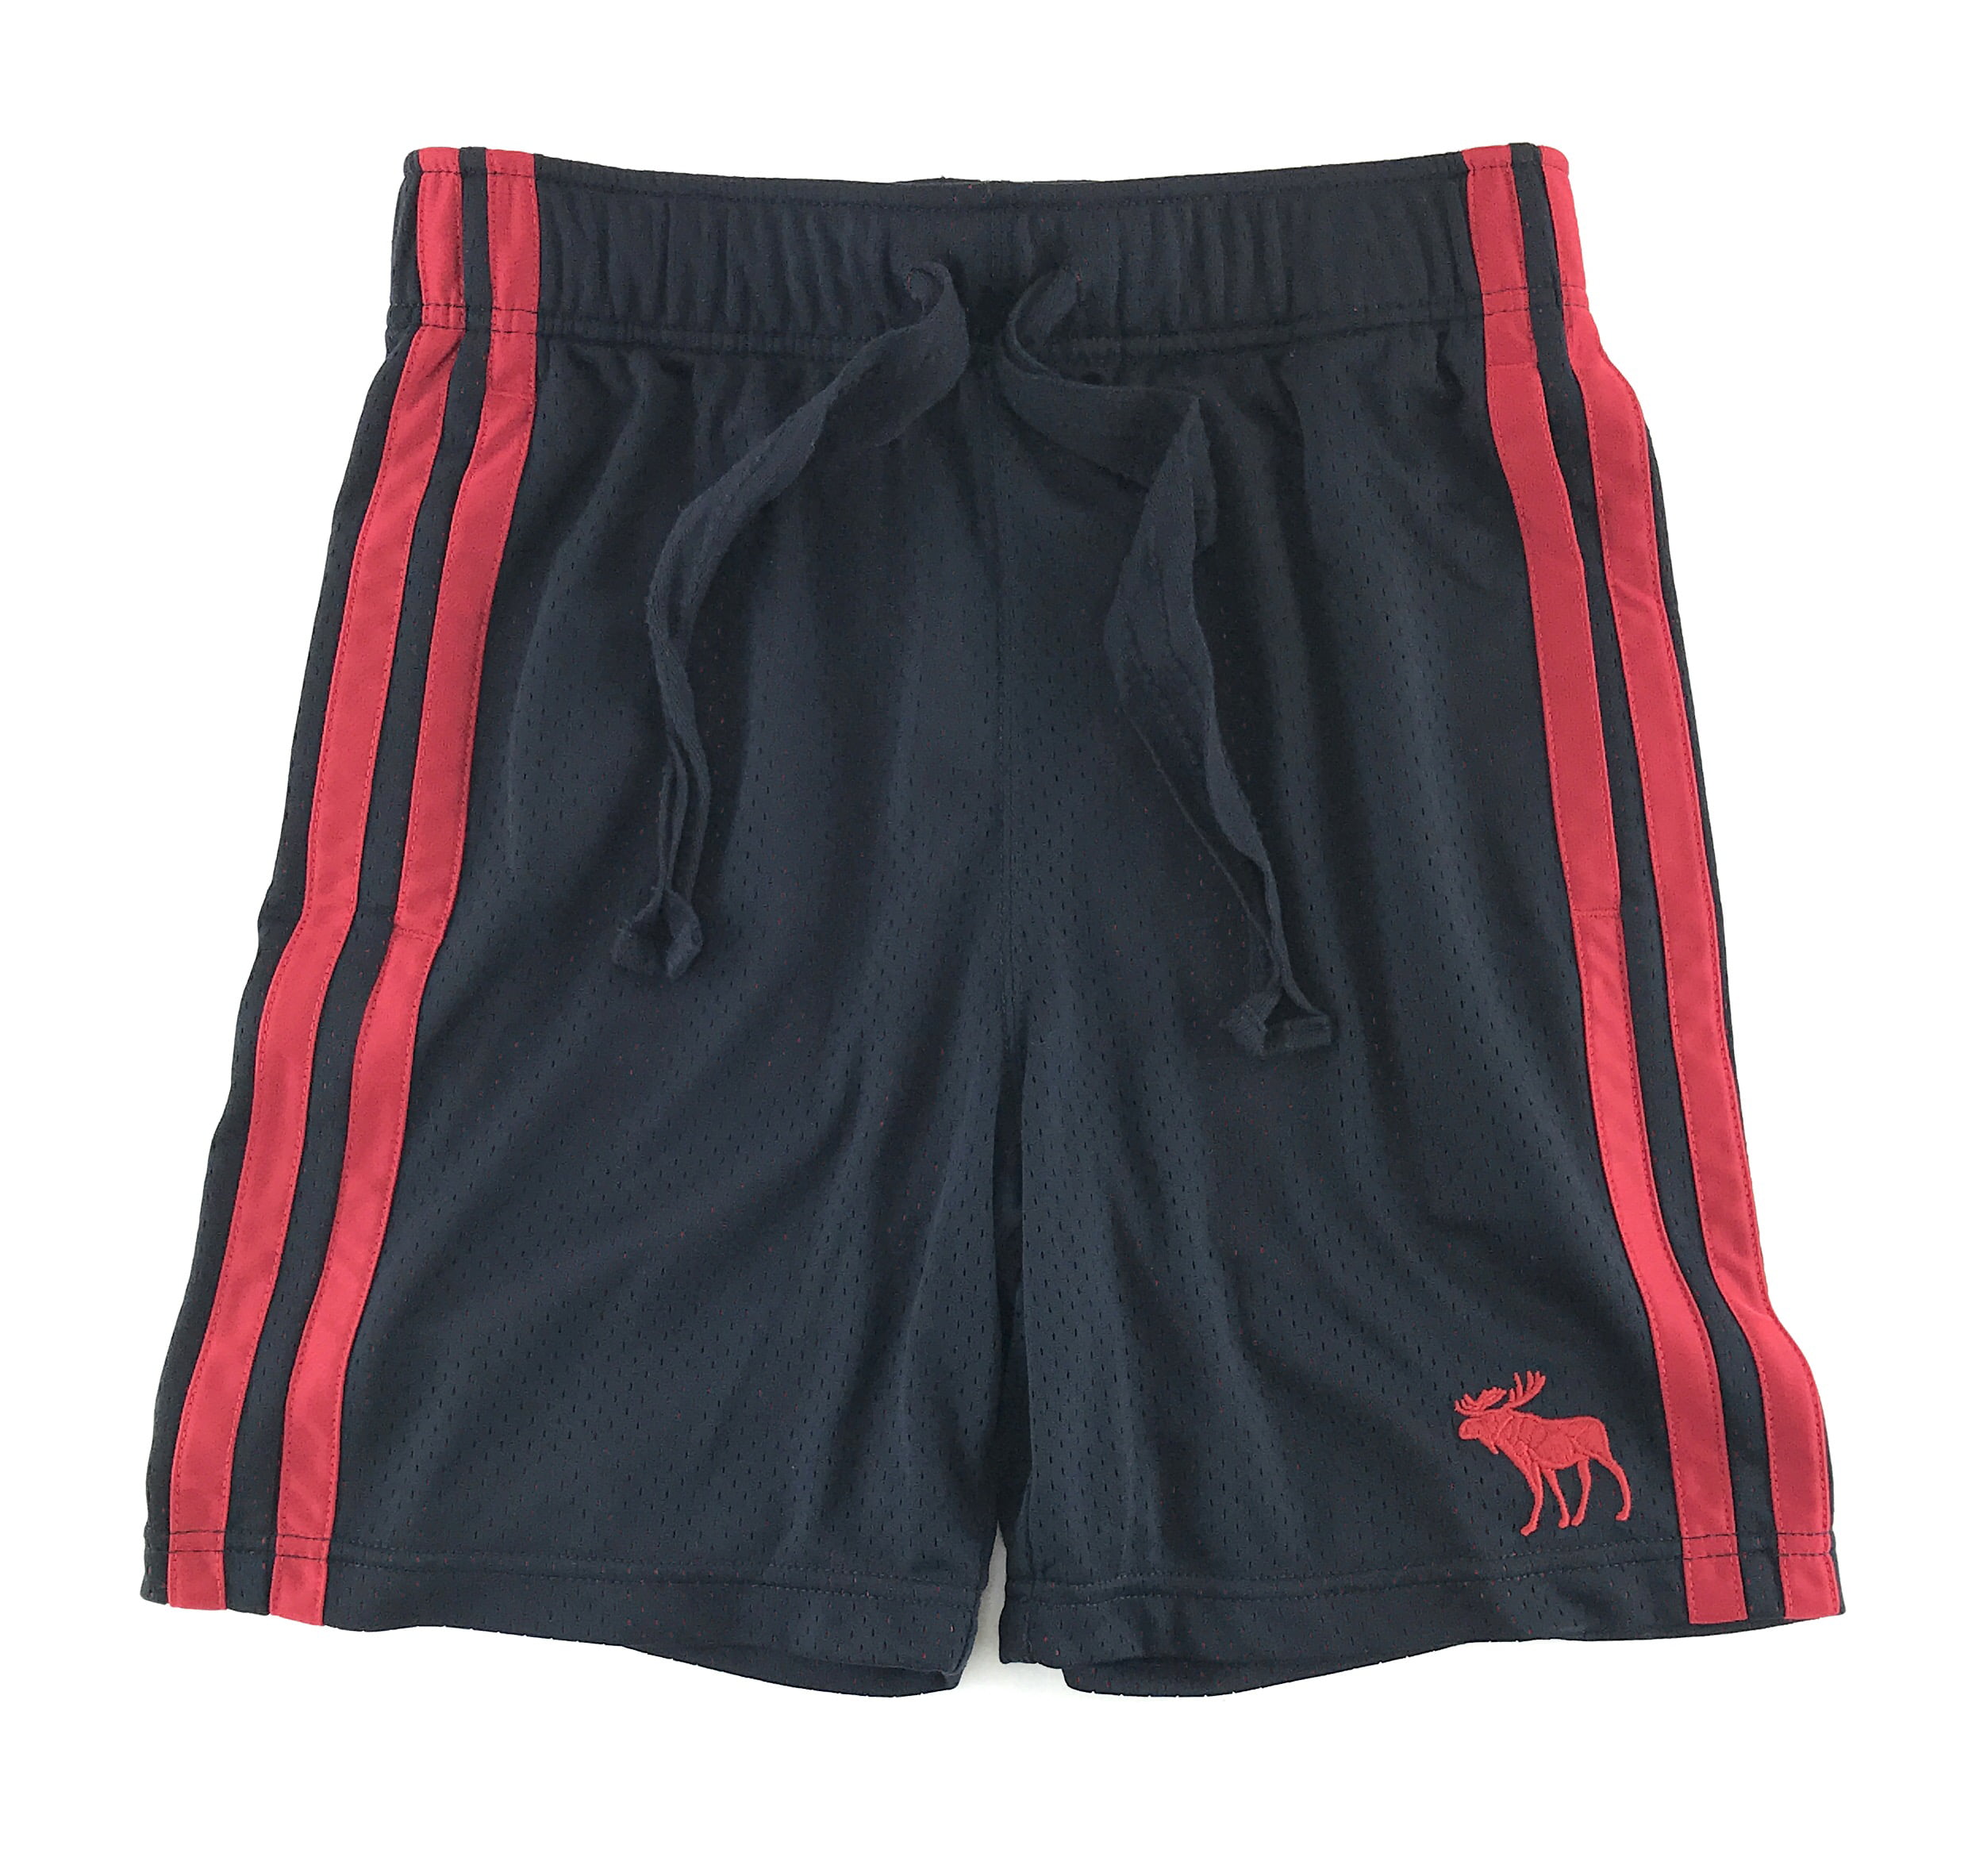 Abercrombie & Fitch Abercrombie & Fitch Mens Athletic Shorts